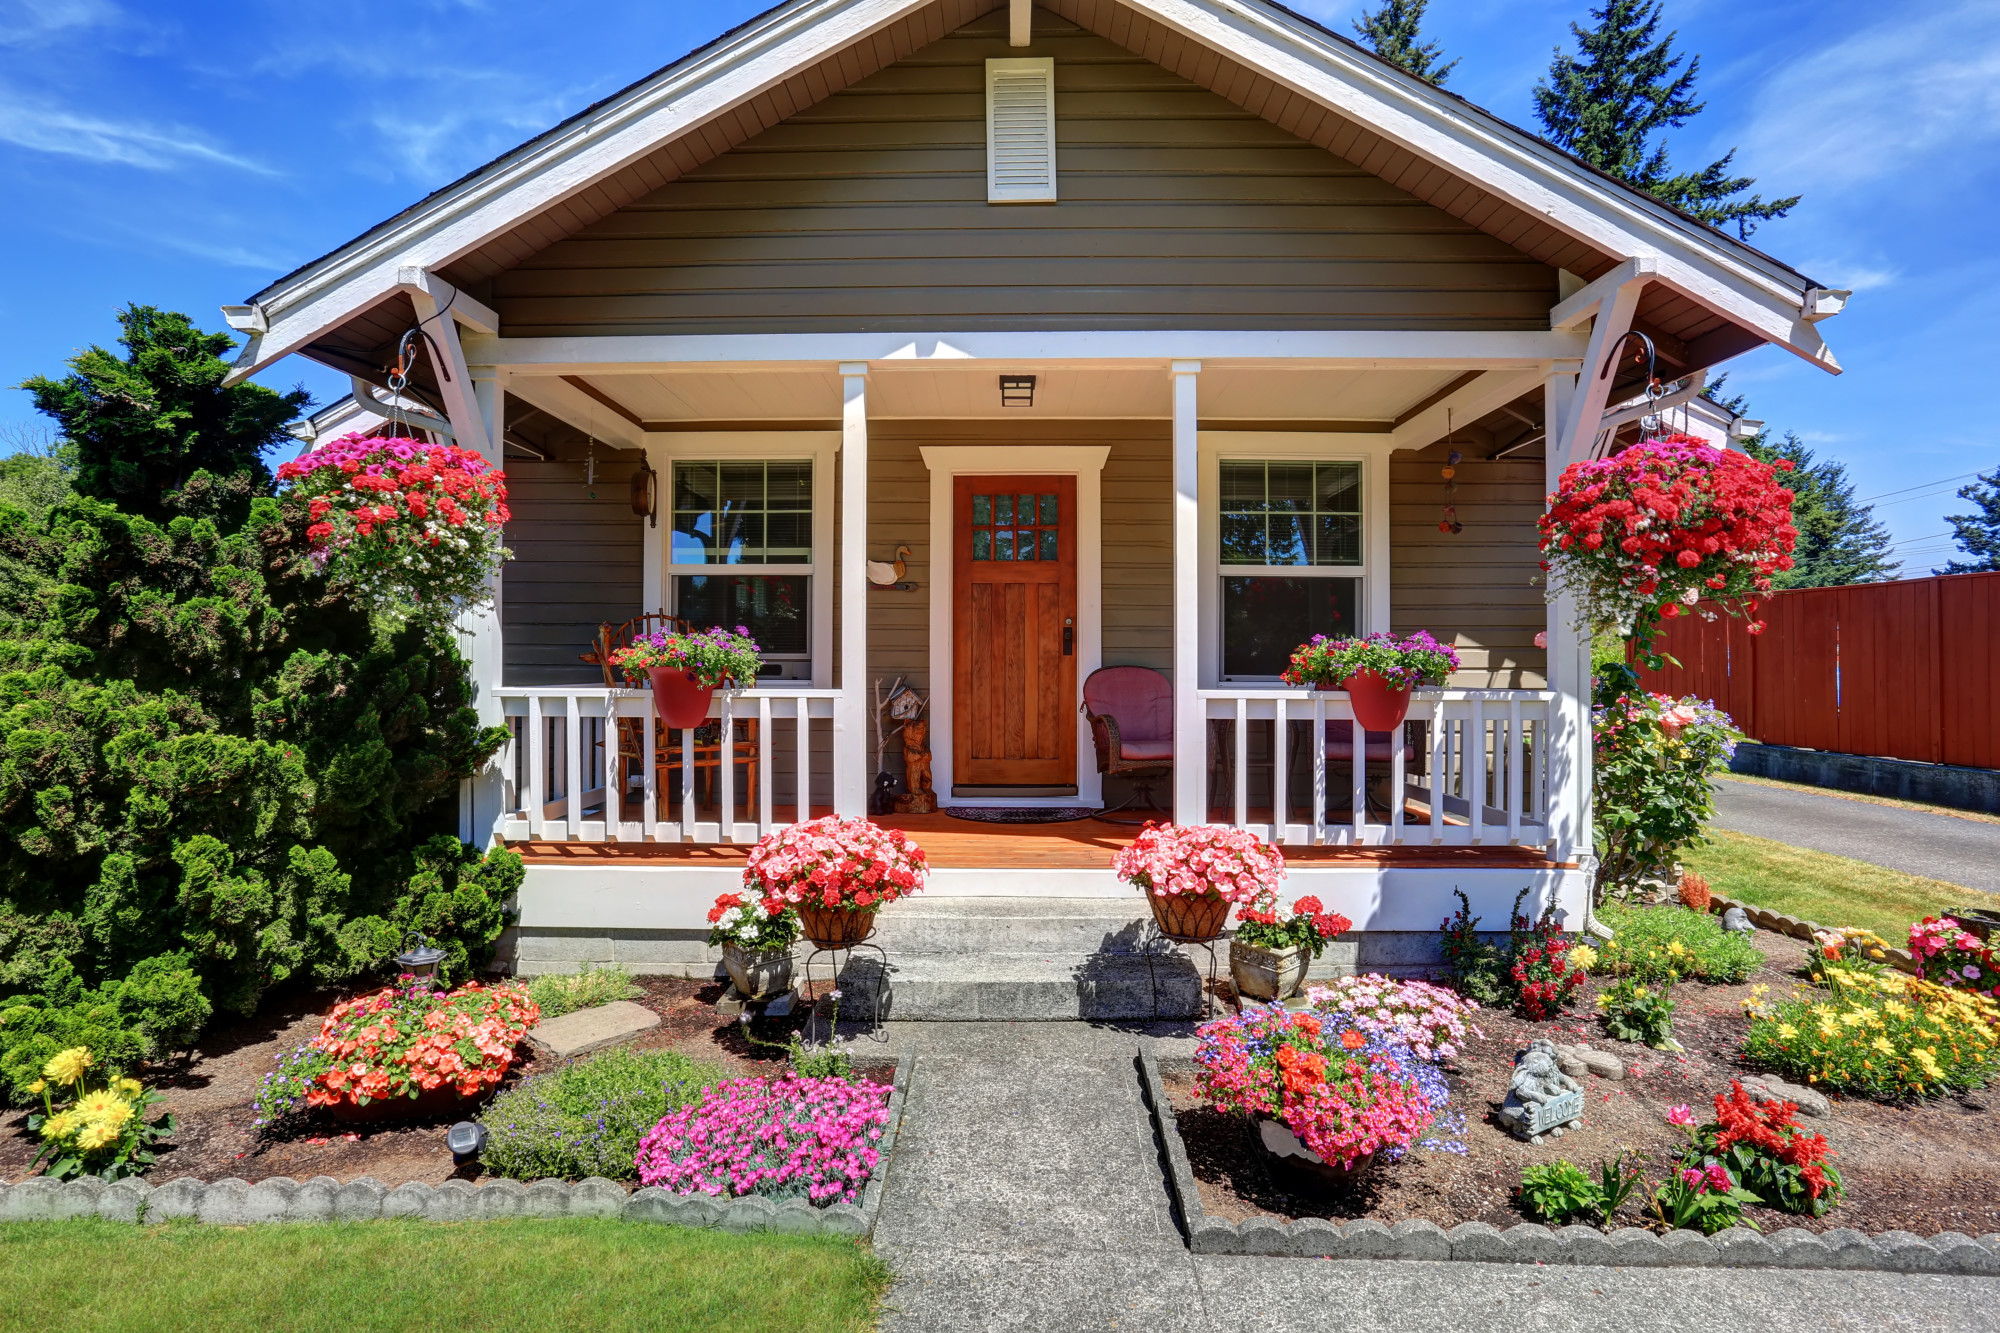 5 Sturdy Front Yard Plants to Boost Curb Appeal